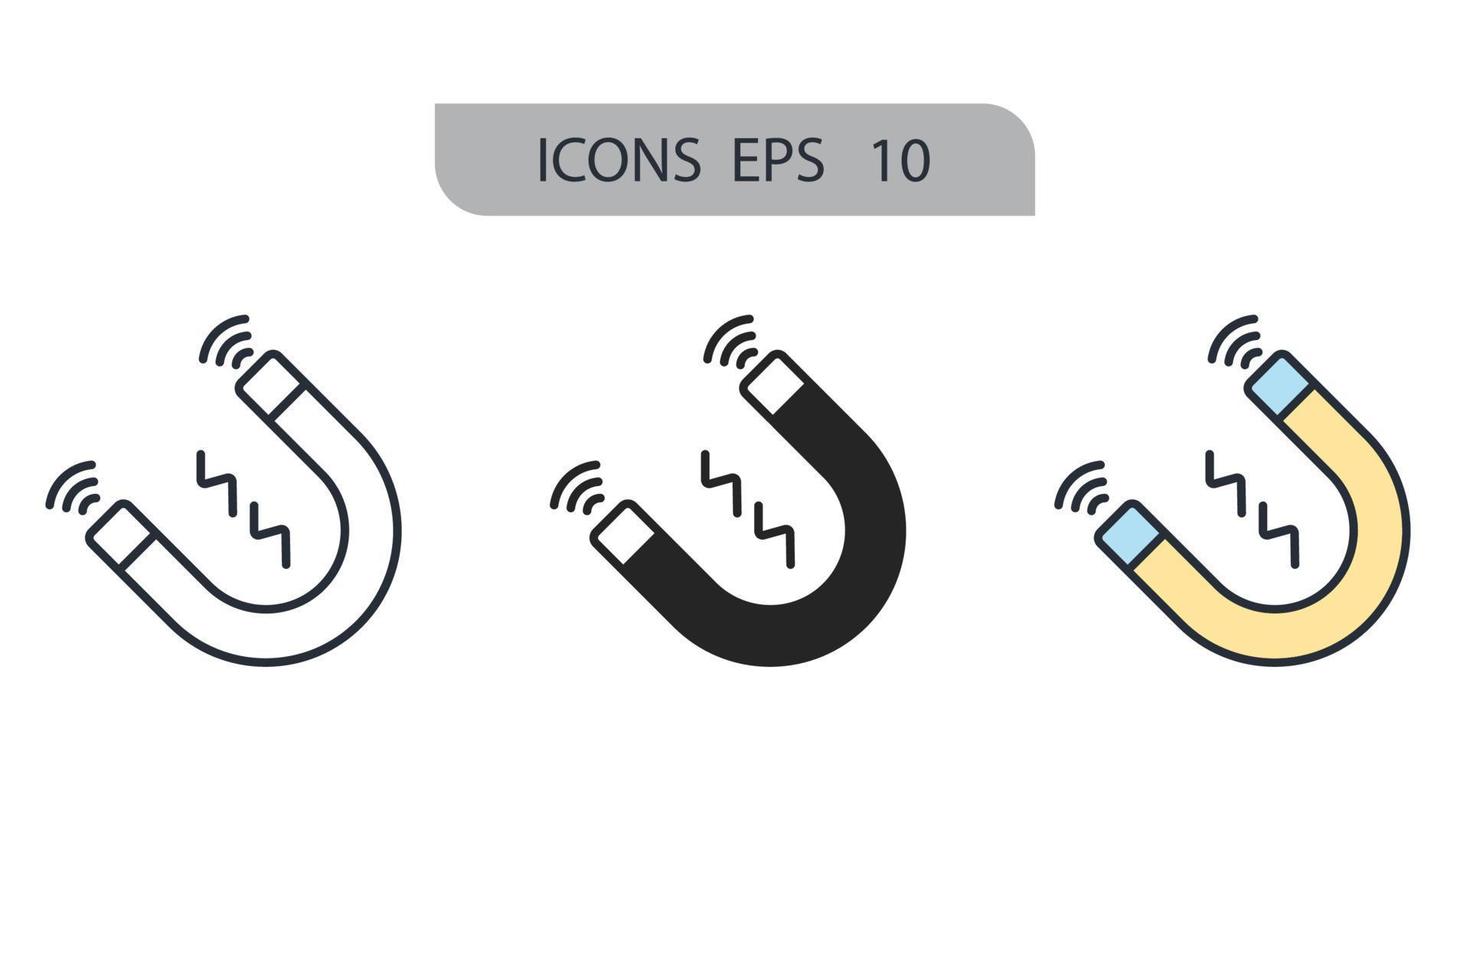 Maps and pins icons  symbol vector elements for infographic web